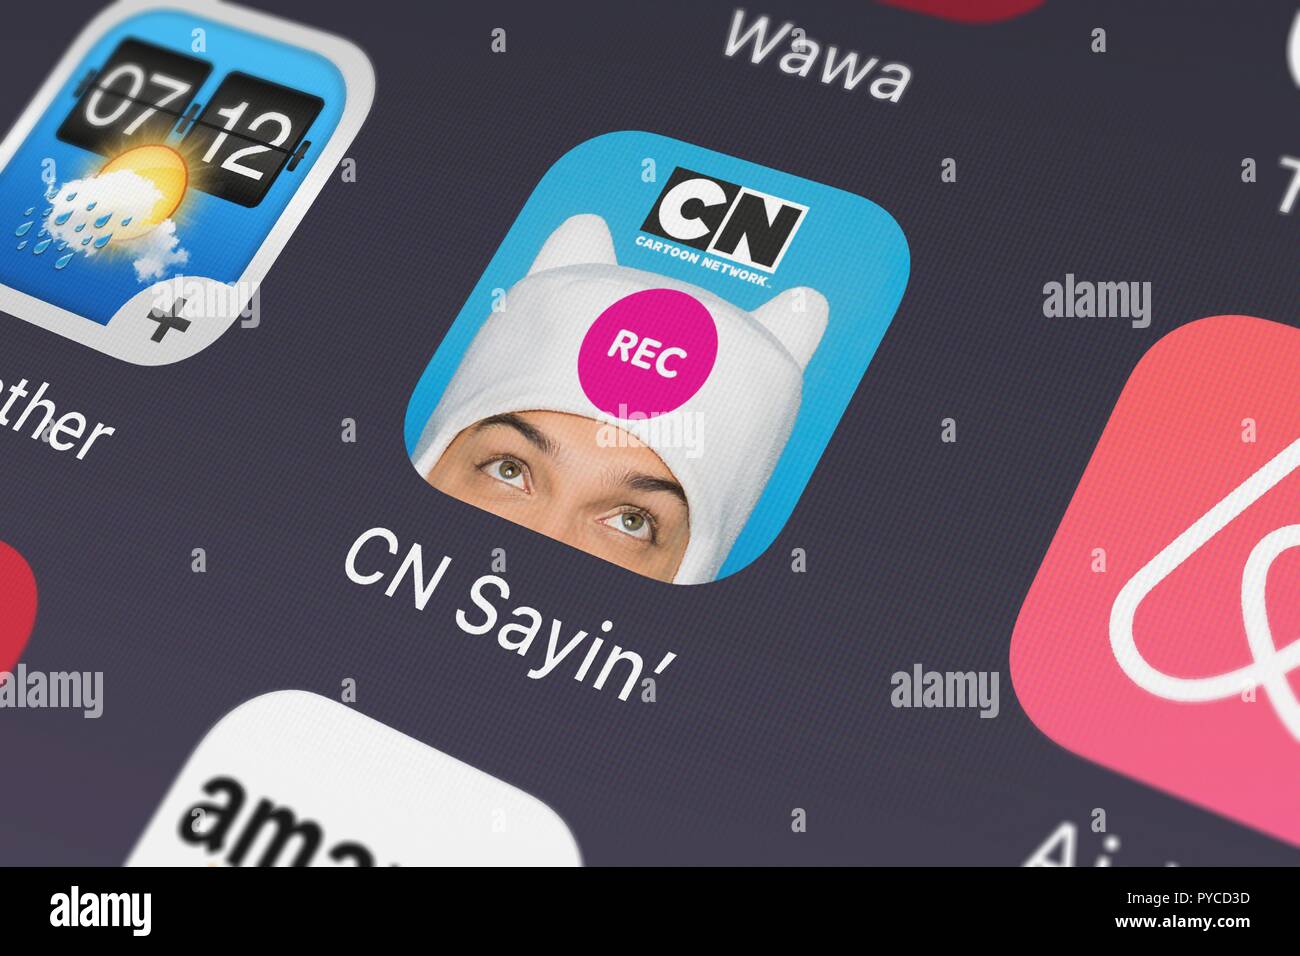 Cartoon Network Mobile Apps